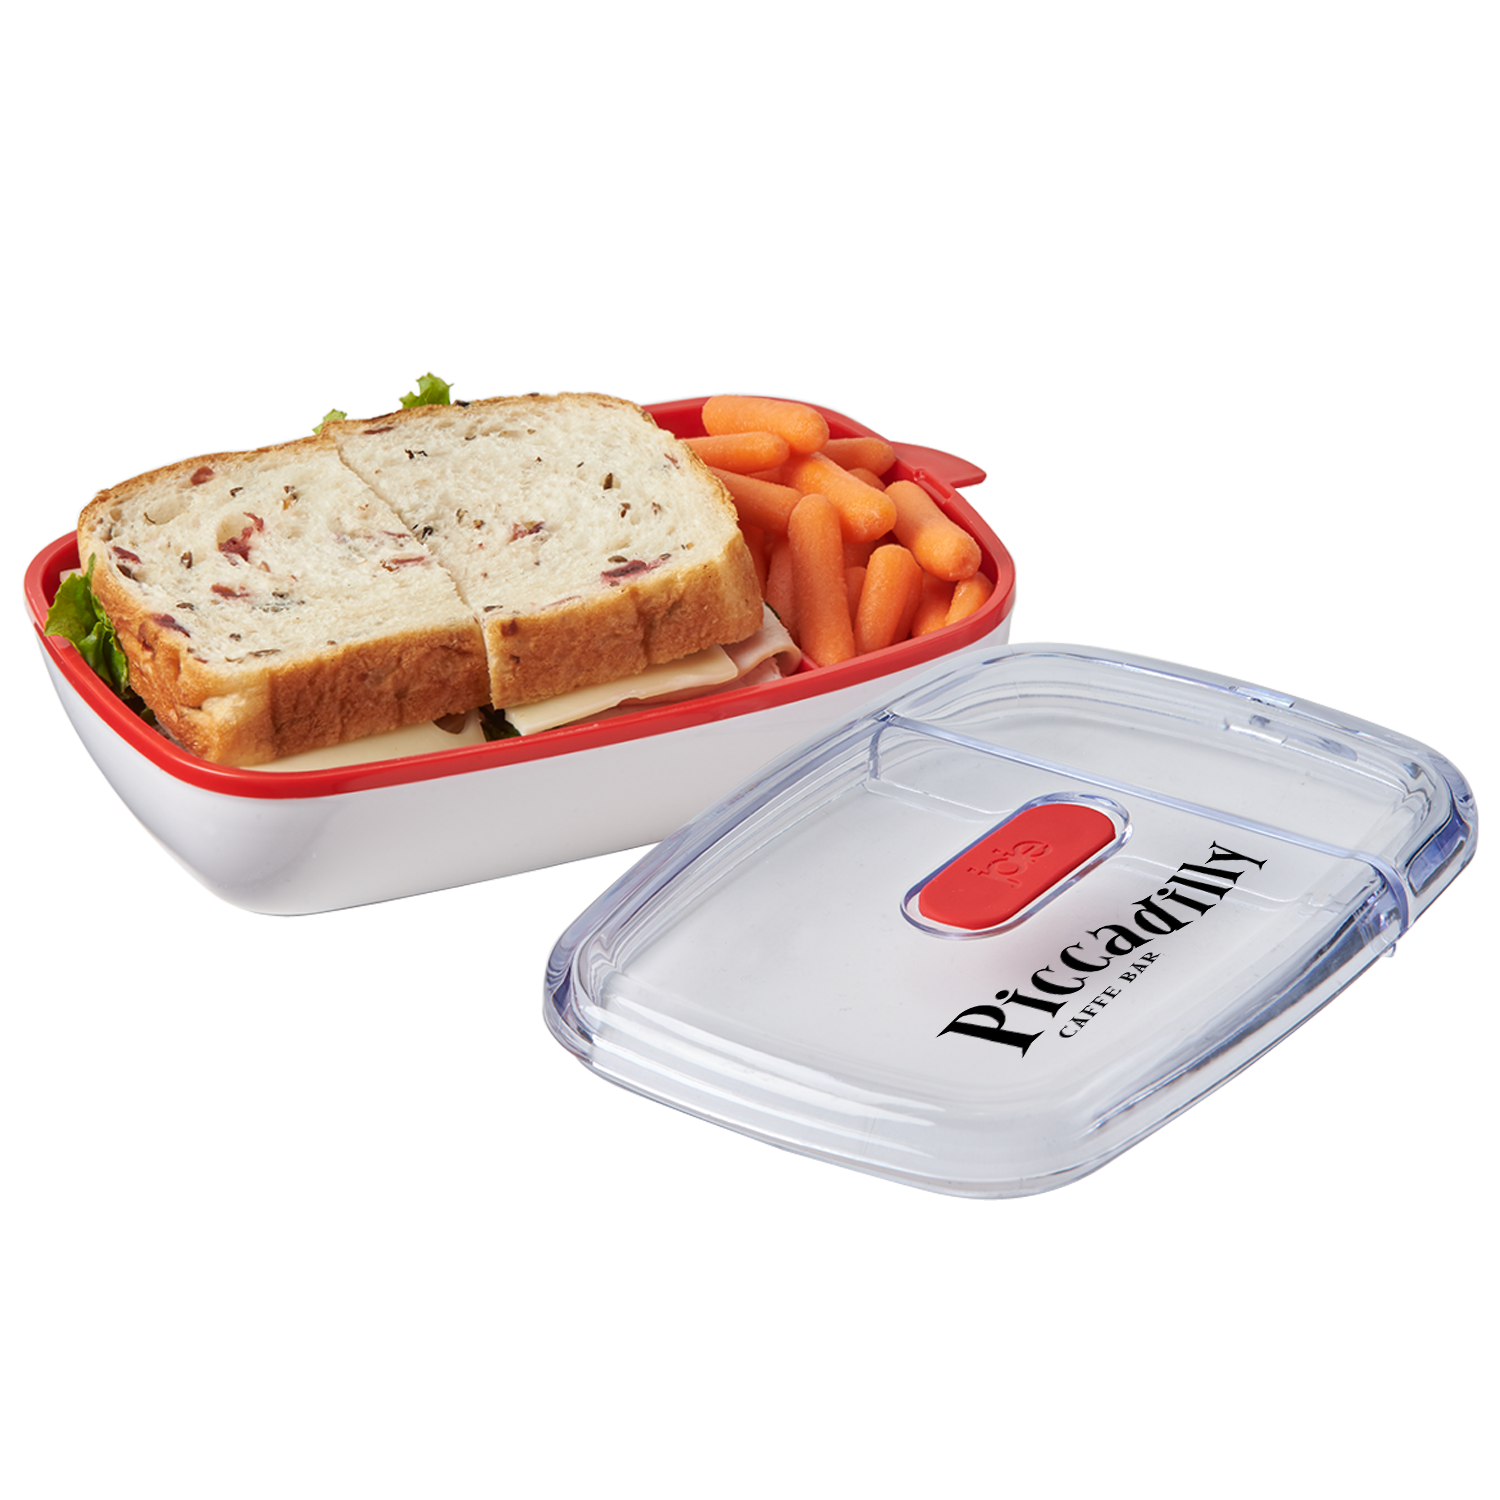 JOIE Sandwich & Snack On The Go Container